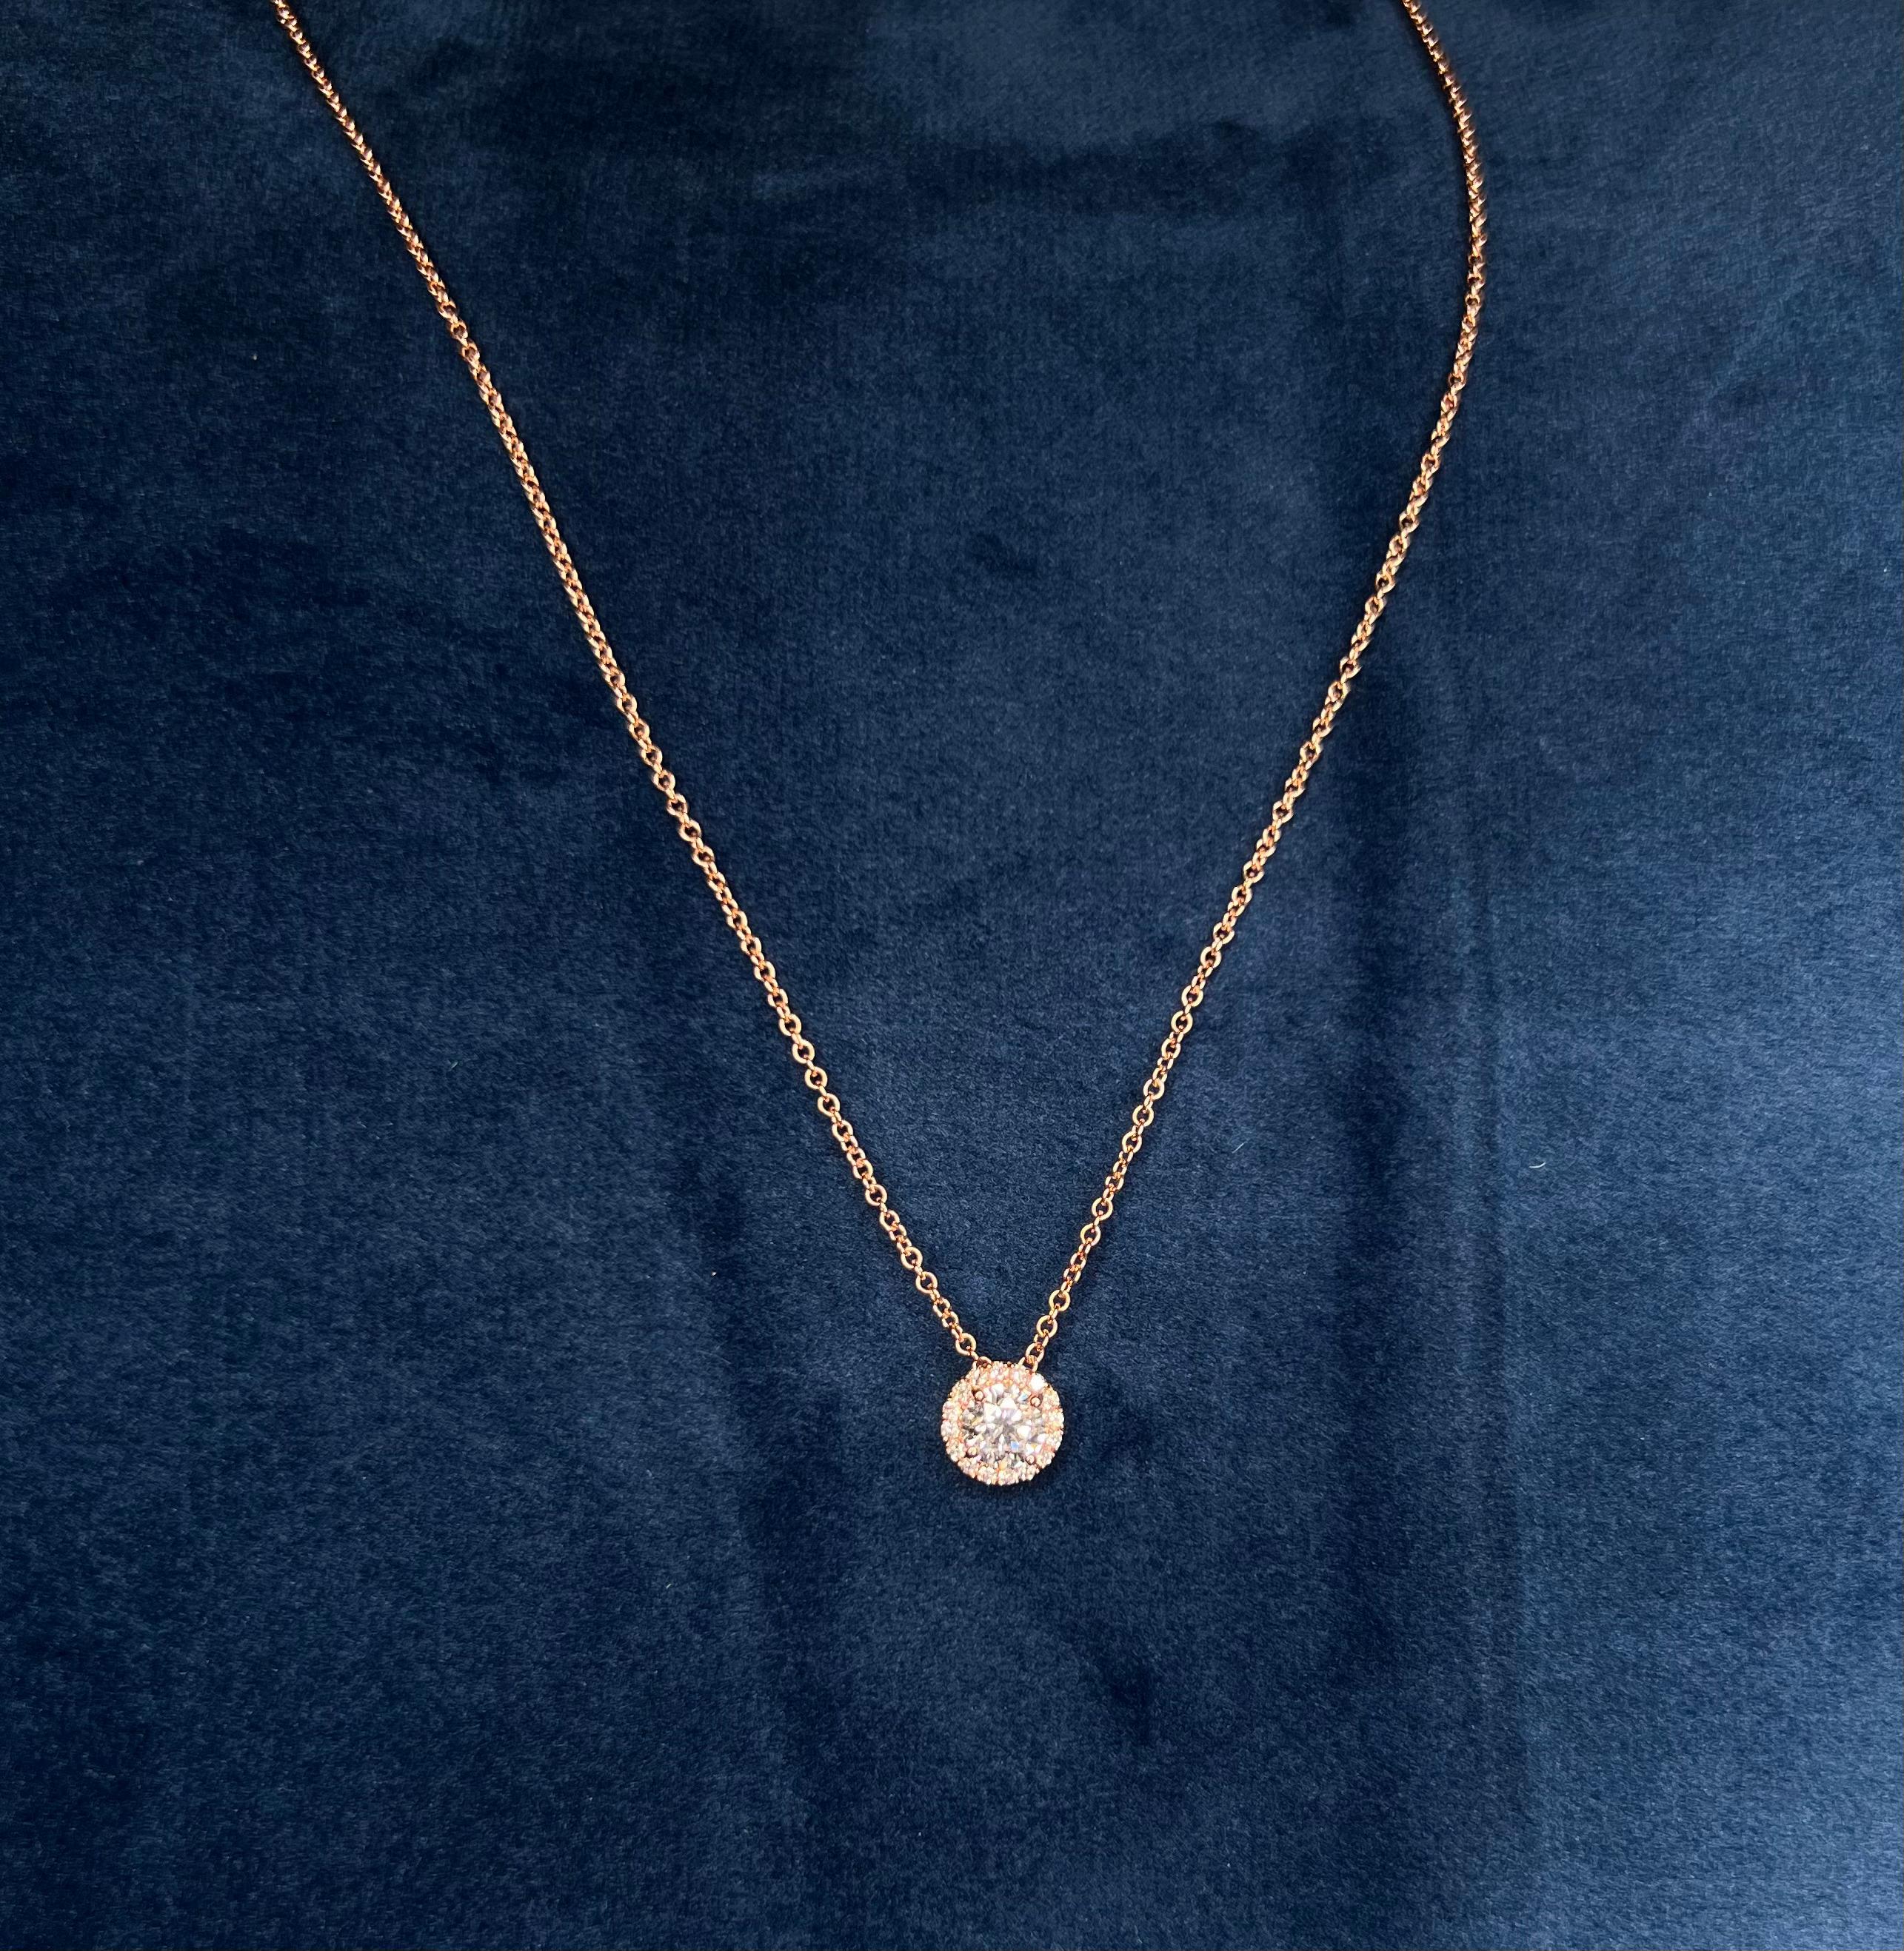 14k Rose Gold 0.65 Carat Round Cut Diamond Solitaire Pendant Necklace In New Condition For Sale In Los Angeles, CA